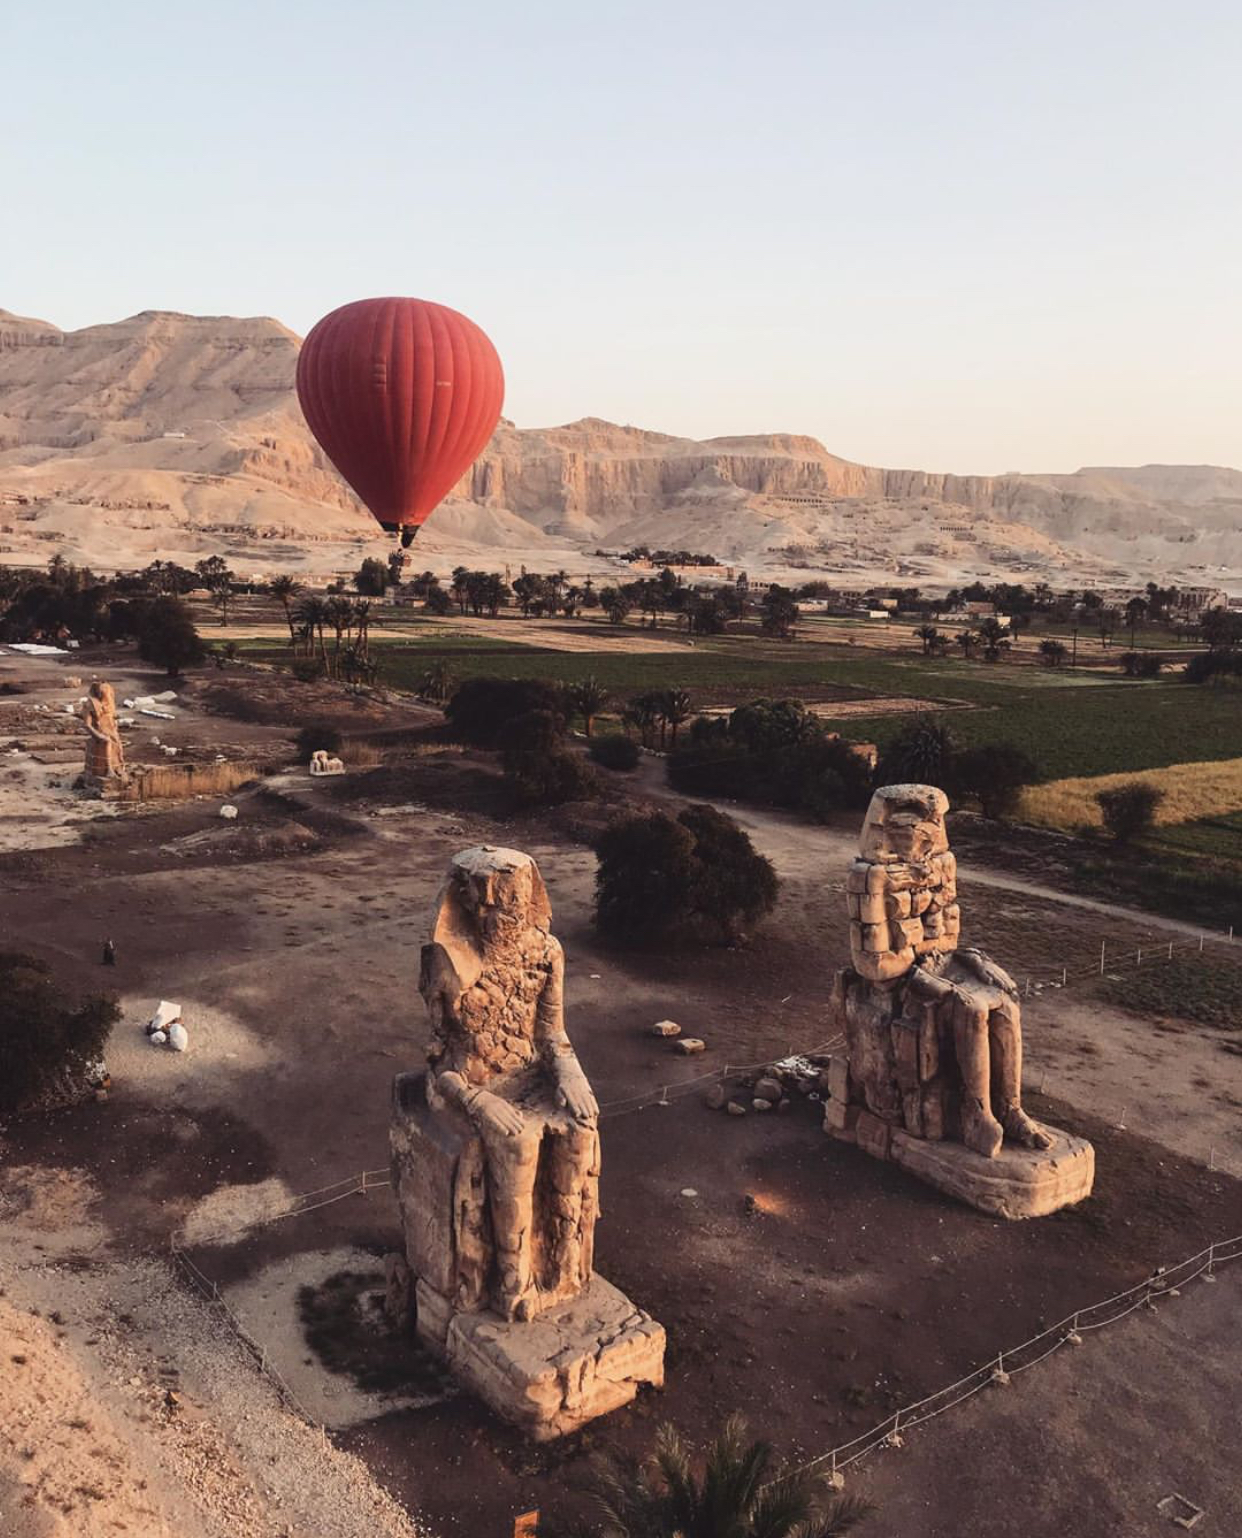 Hij verdund Vacature Visit Luxor in Hot Air Balloon – «THERE IS NO DREAM QUITE SO SATISFYING AS  THE ONE OF FLYING» G. Vidal